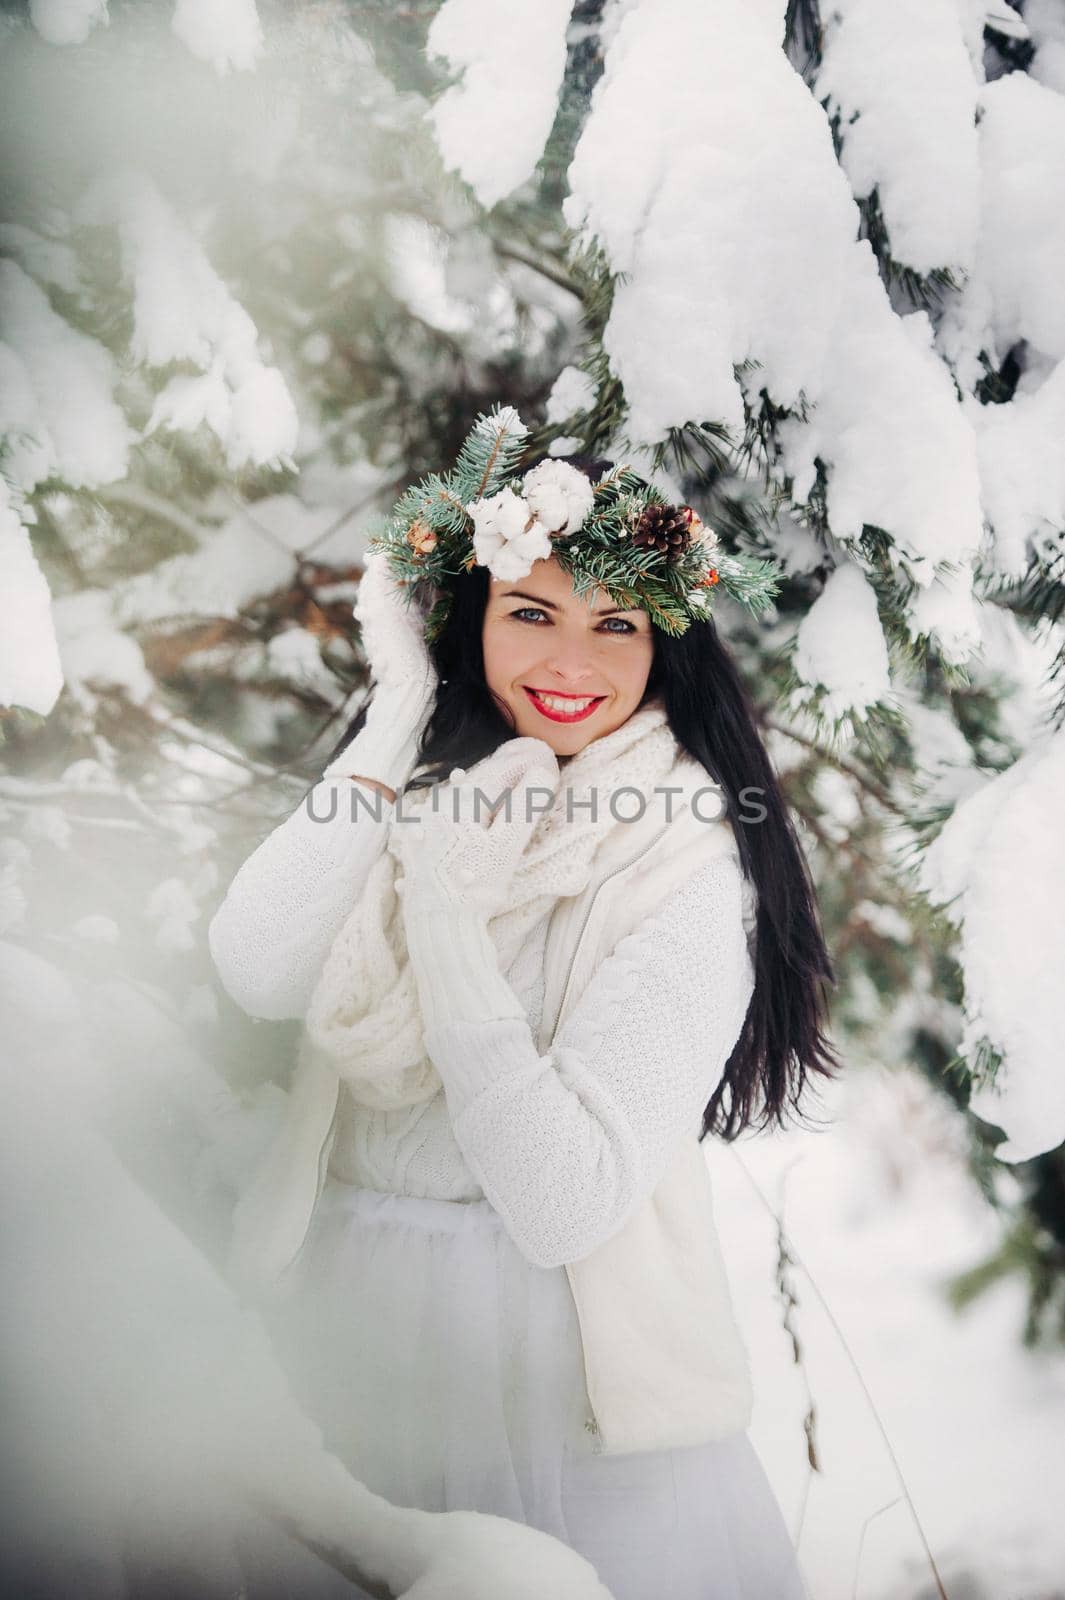 Portrait of a woman in white clothes in a cold winter forest. Girl with a wreath on her head in a snow-covered winter forest.